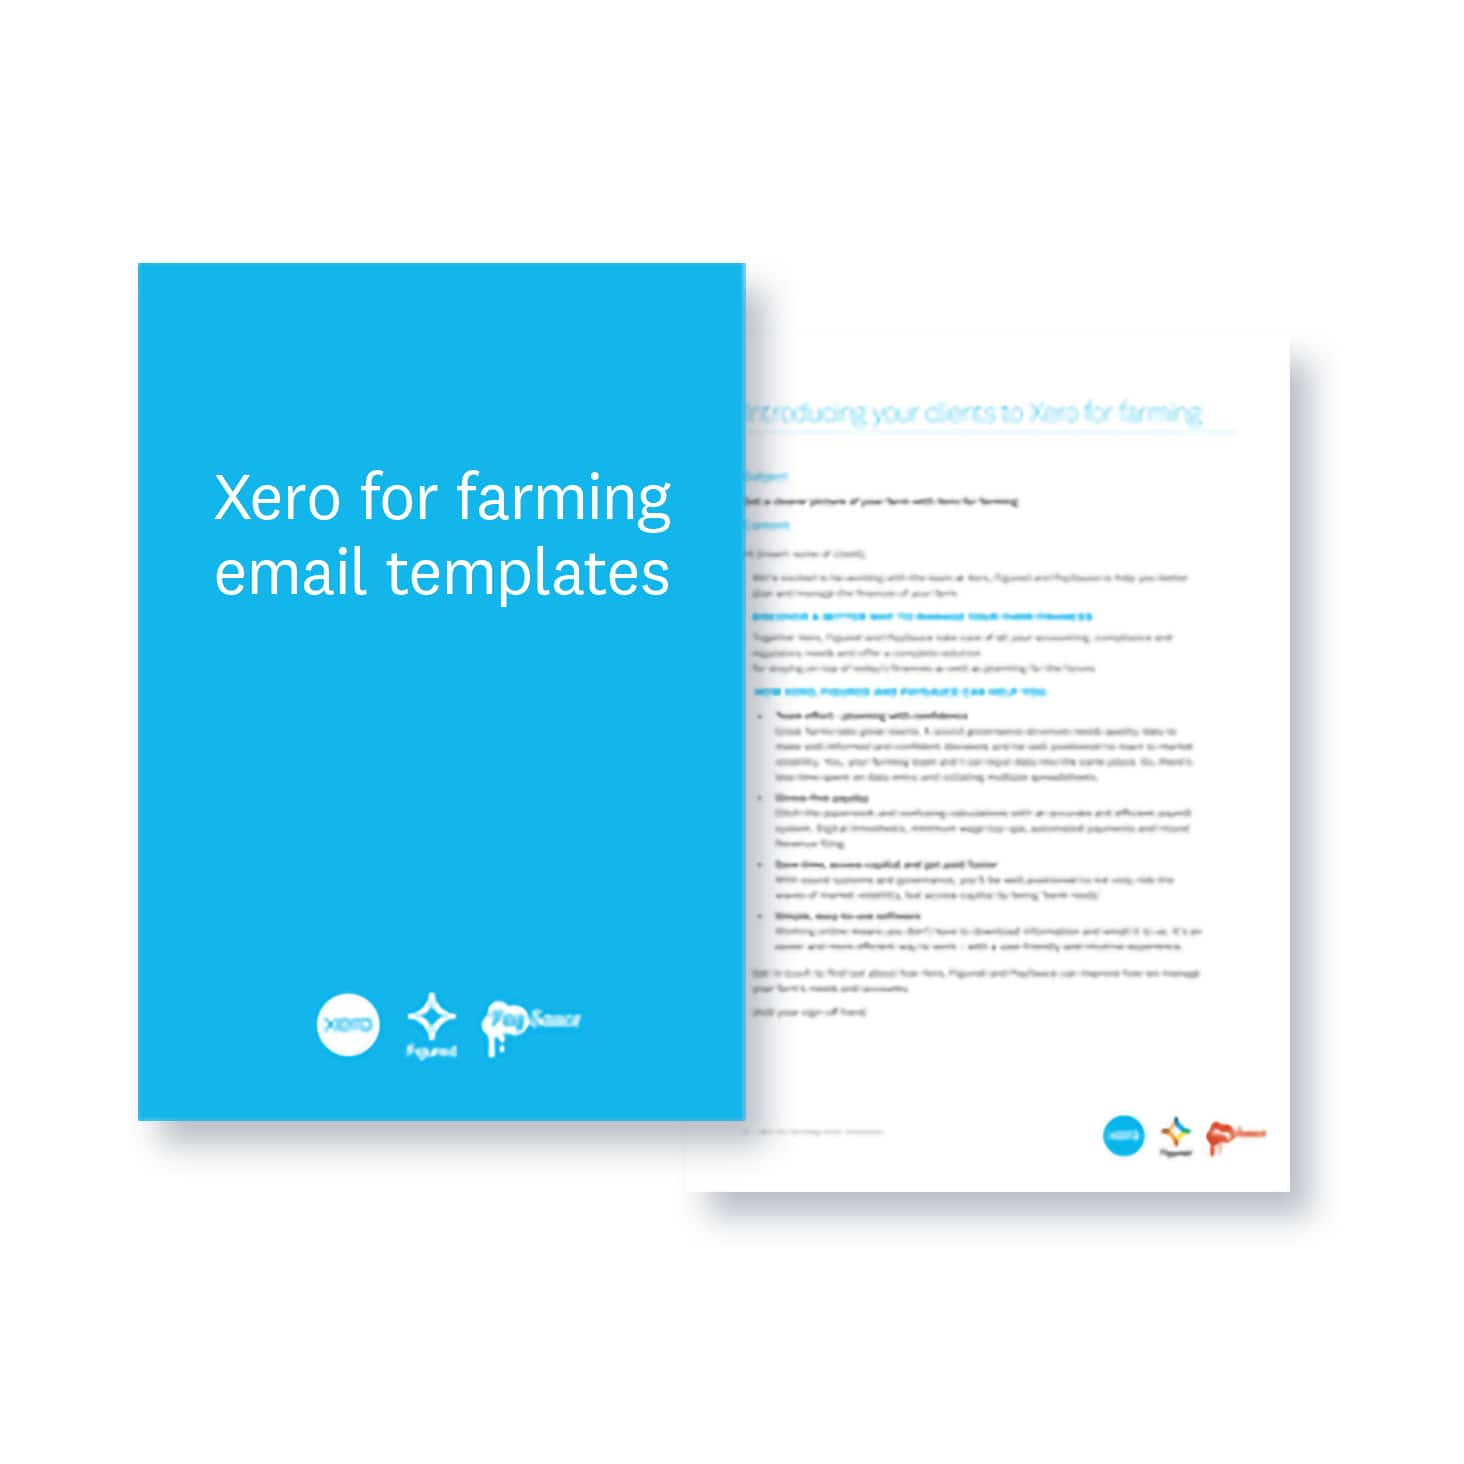 Examples of Xero for farming email templates.    